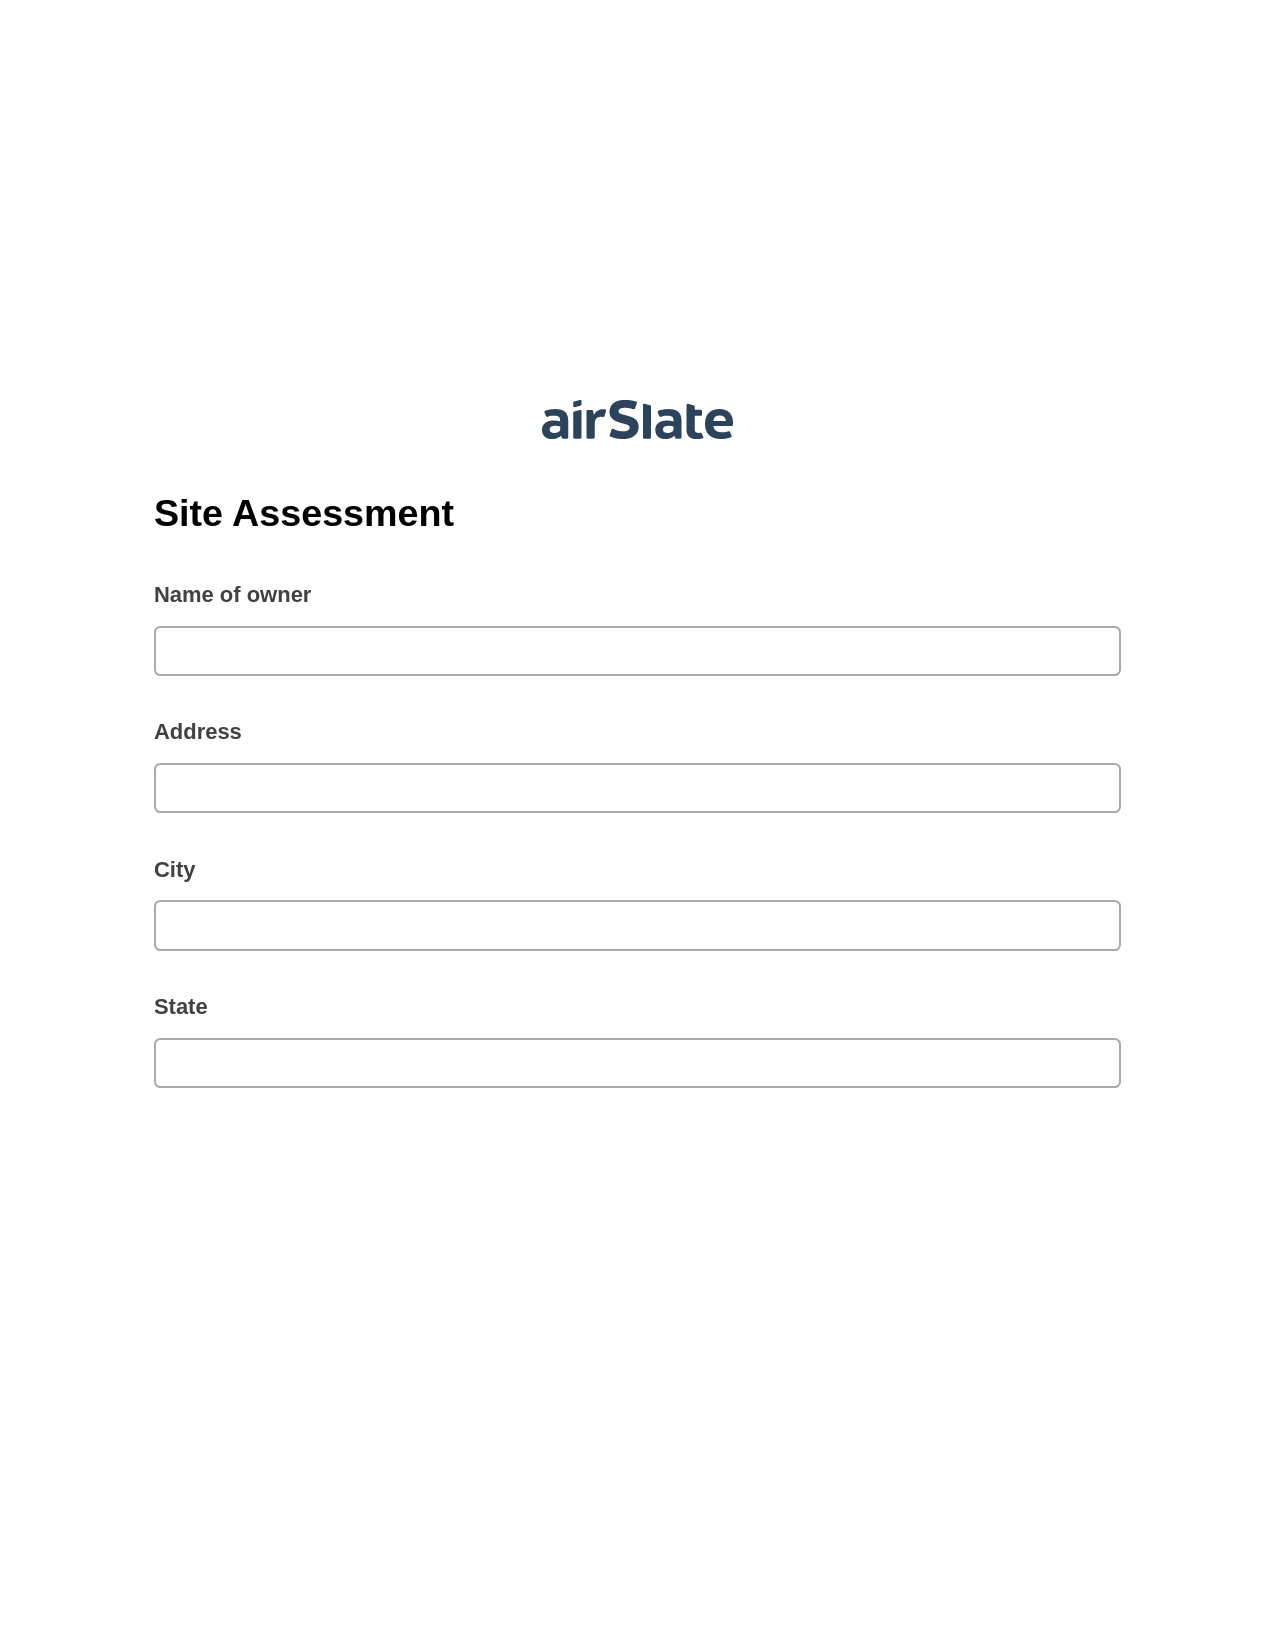 Site Assessment Pre-fill Dropdown from Airtable, Document Hide Bot, Webhook Postfinish Bot